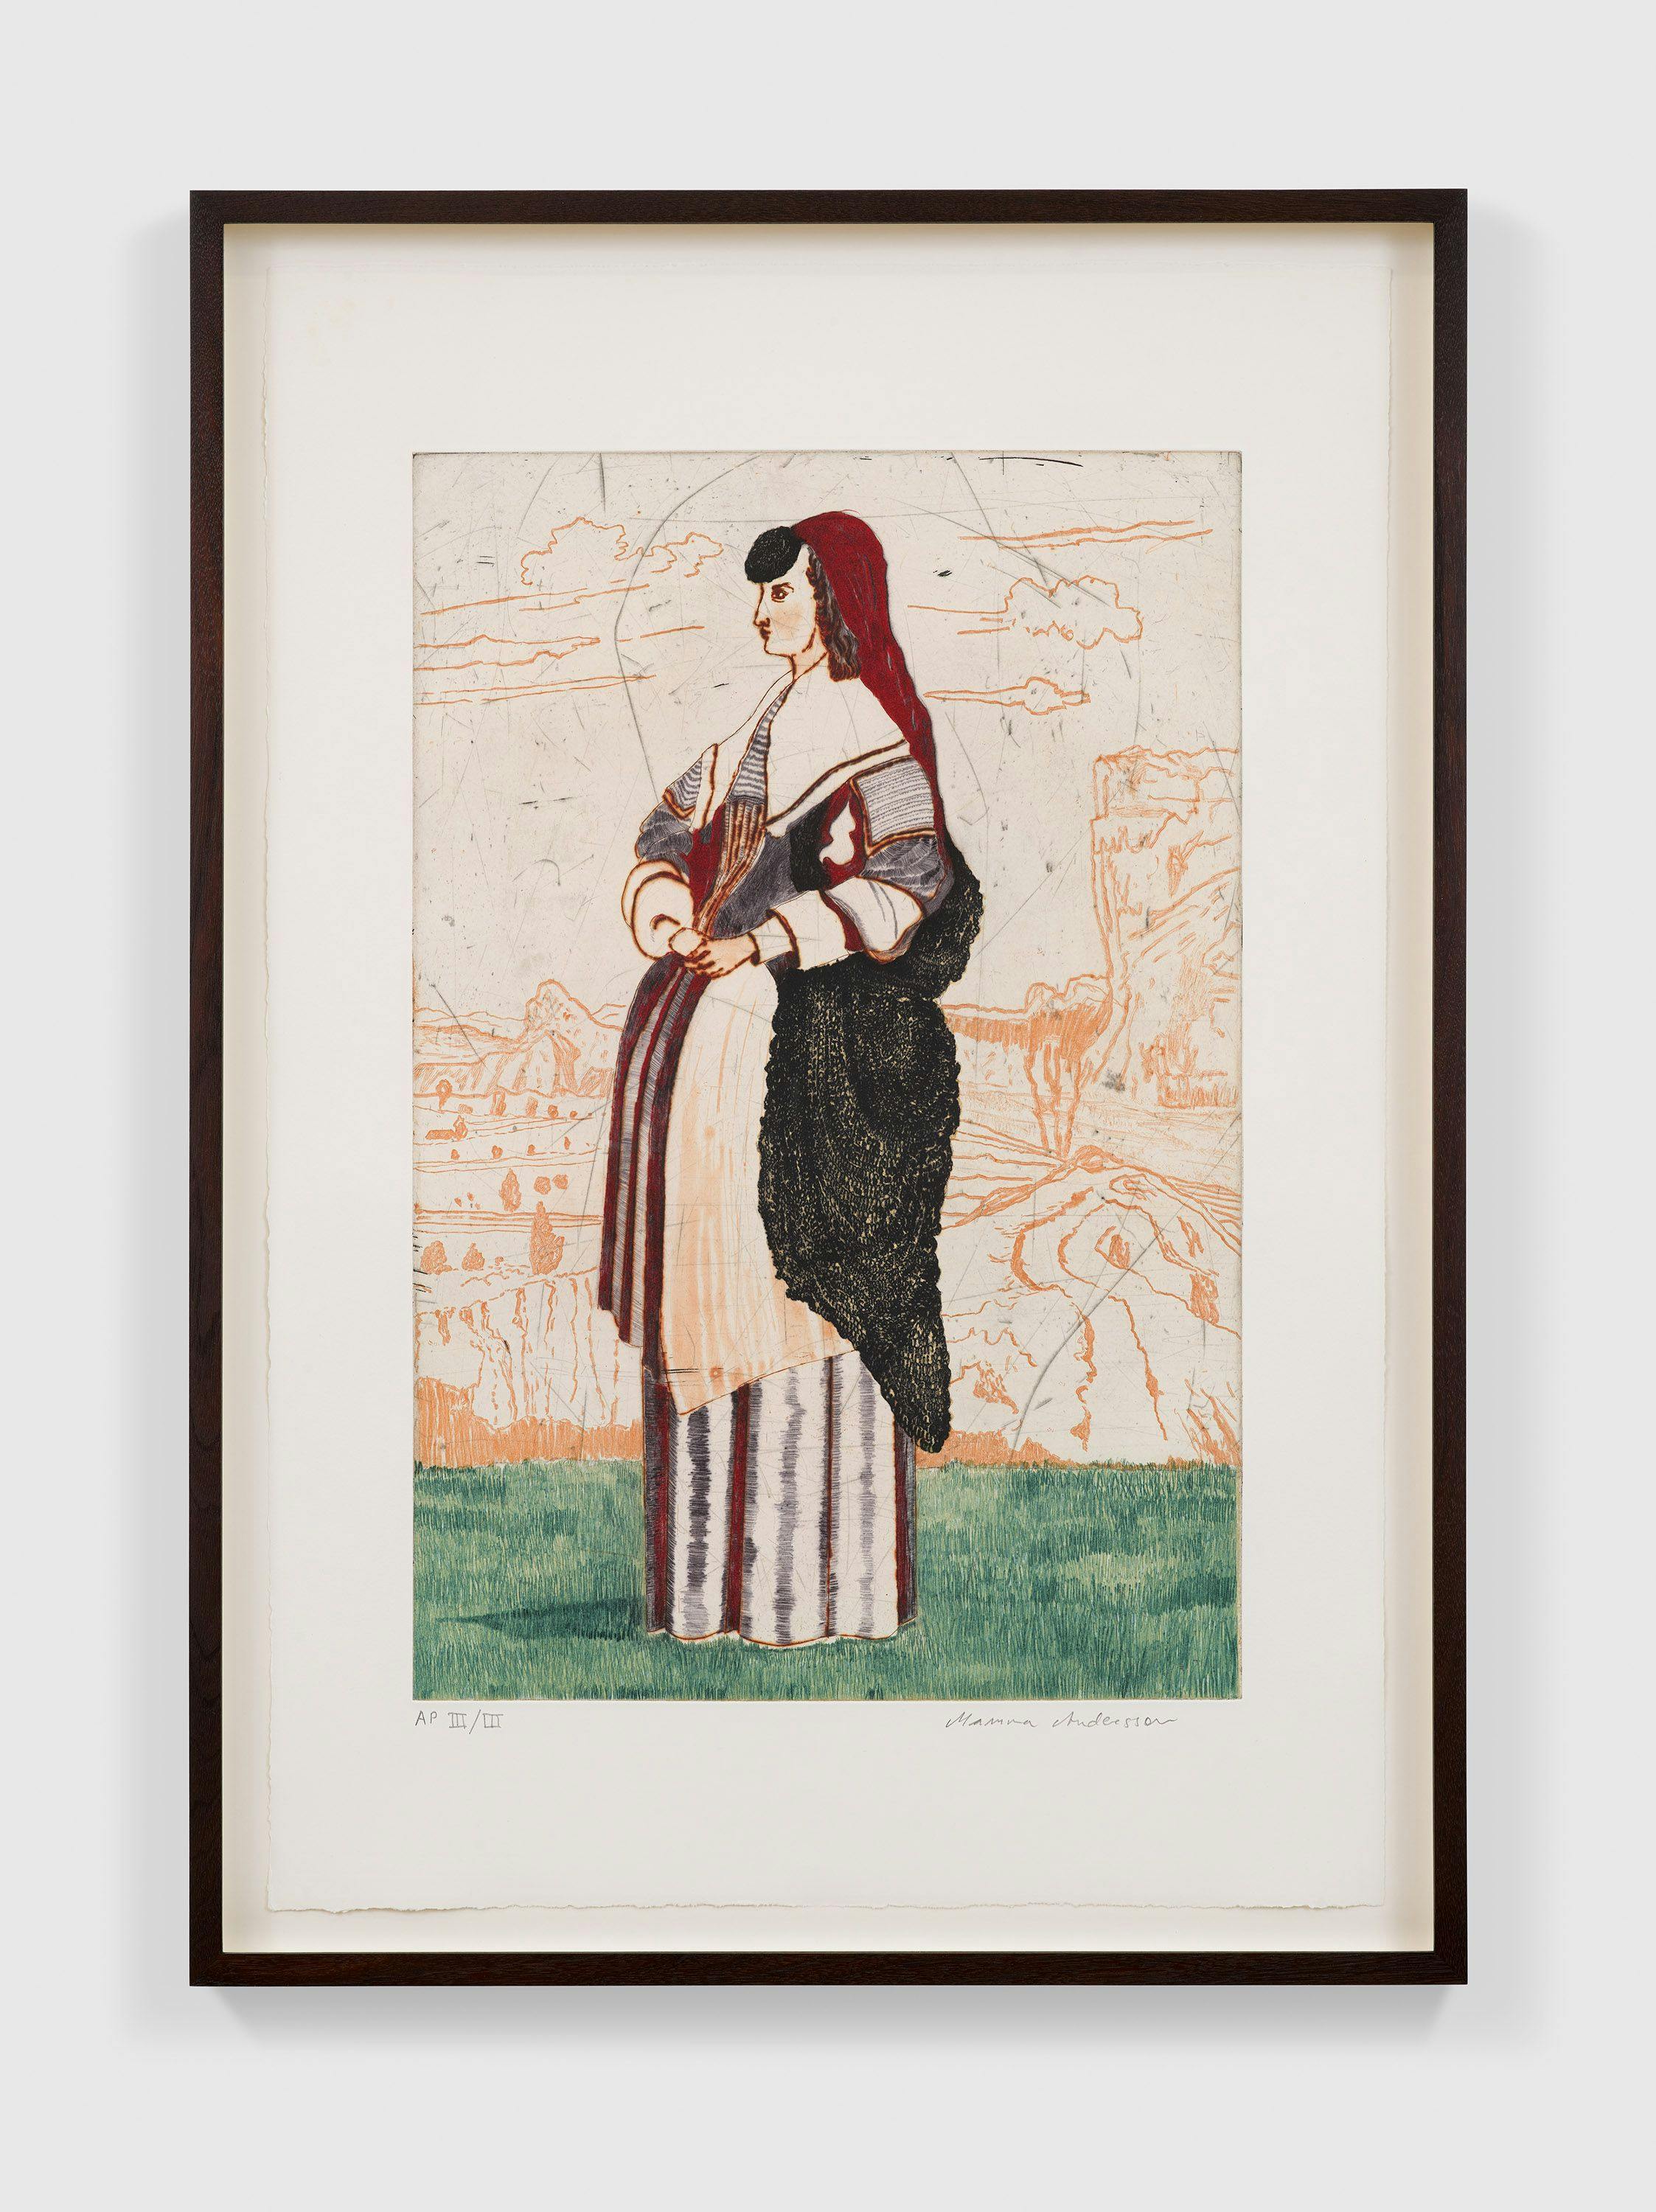 A print by Mamma Andersson, titled Mademoiselle, dated 2022.